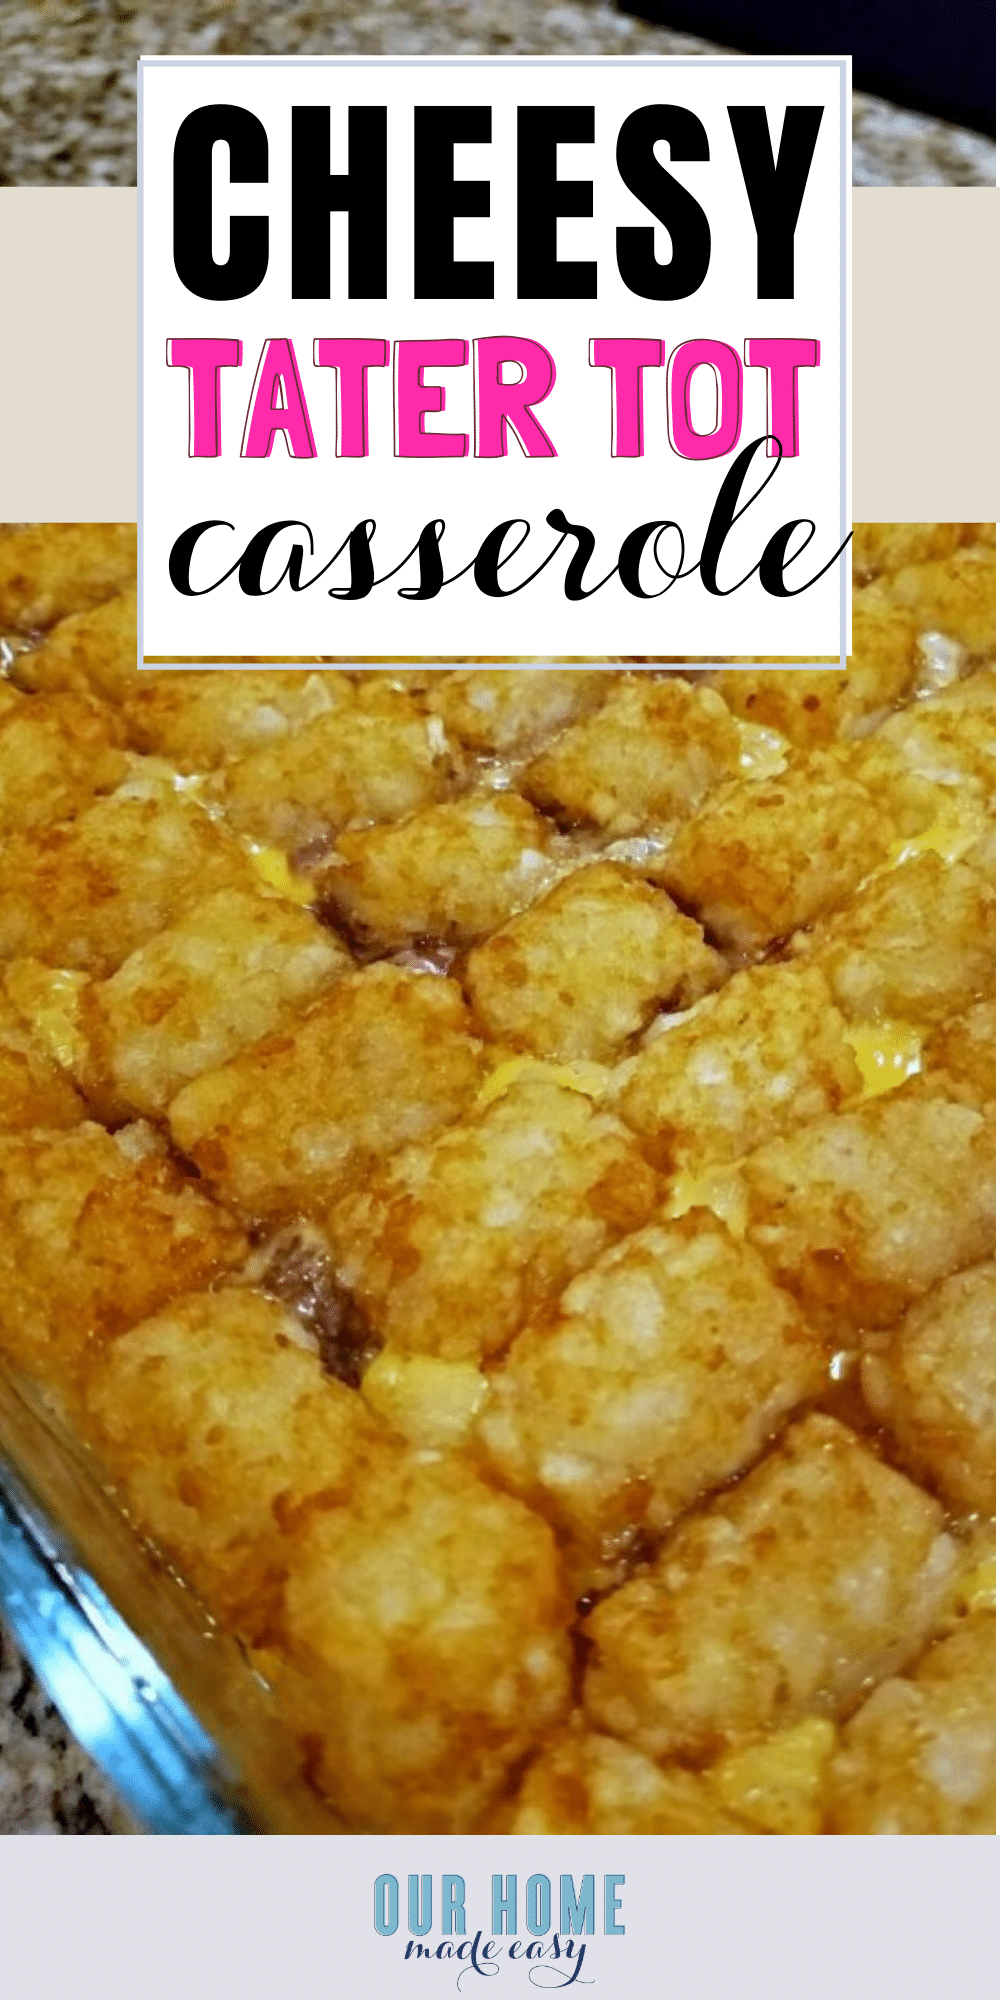 This easy tater tot casserole only calls for 4 main ingredients, and you can add in your favorite mix ins to flavor it up!